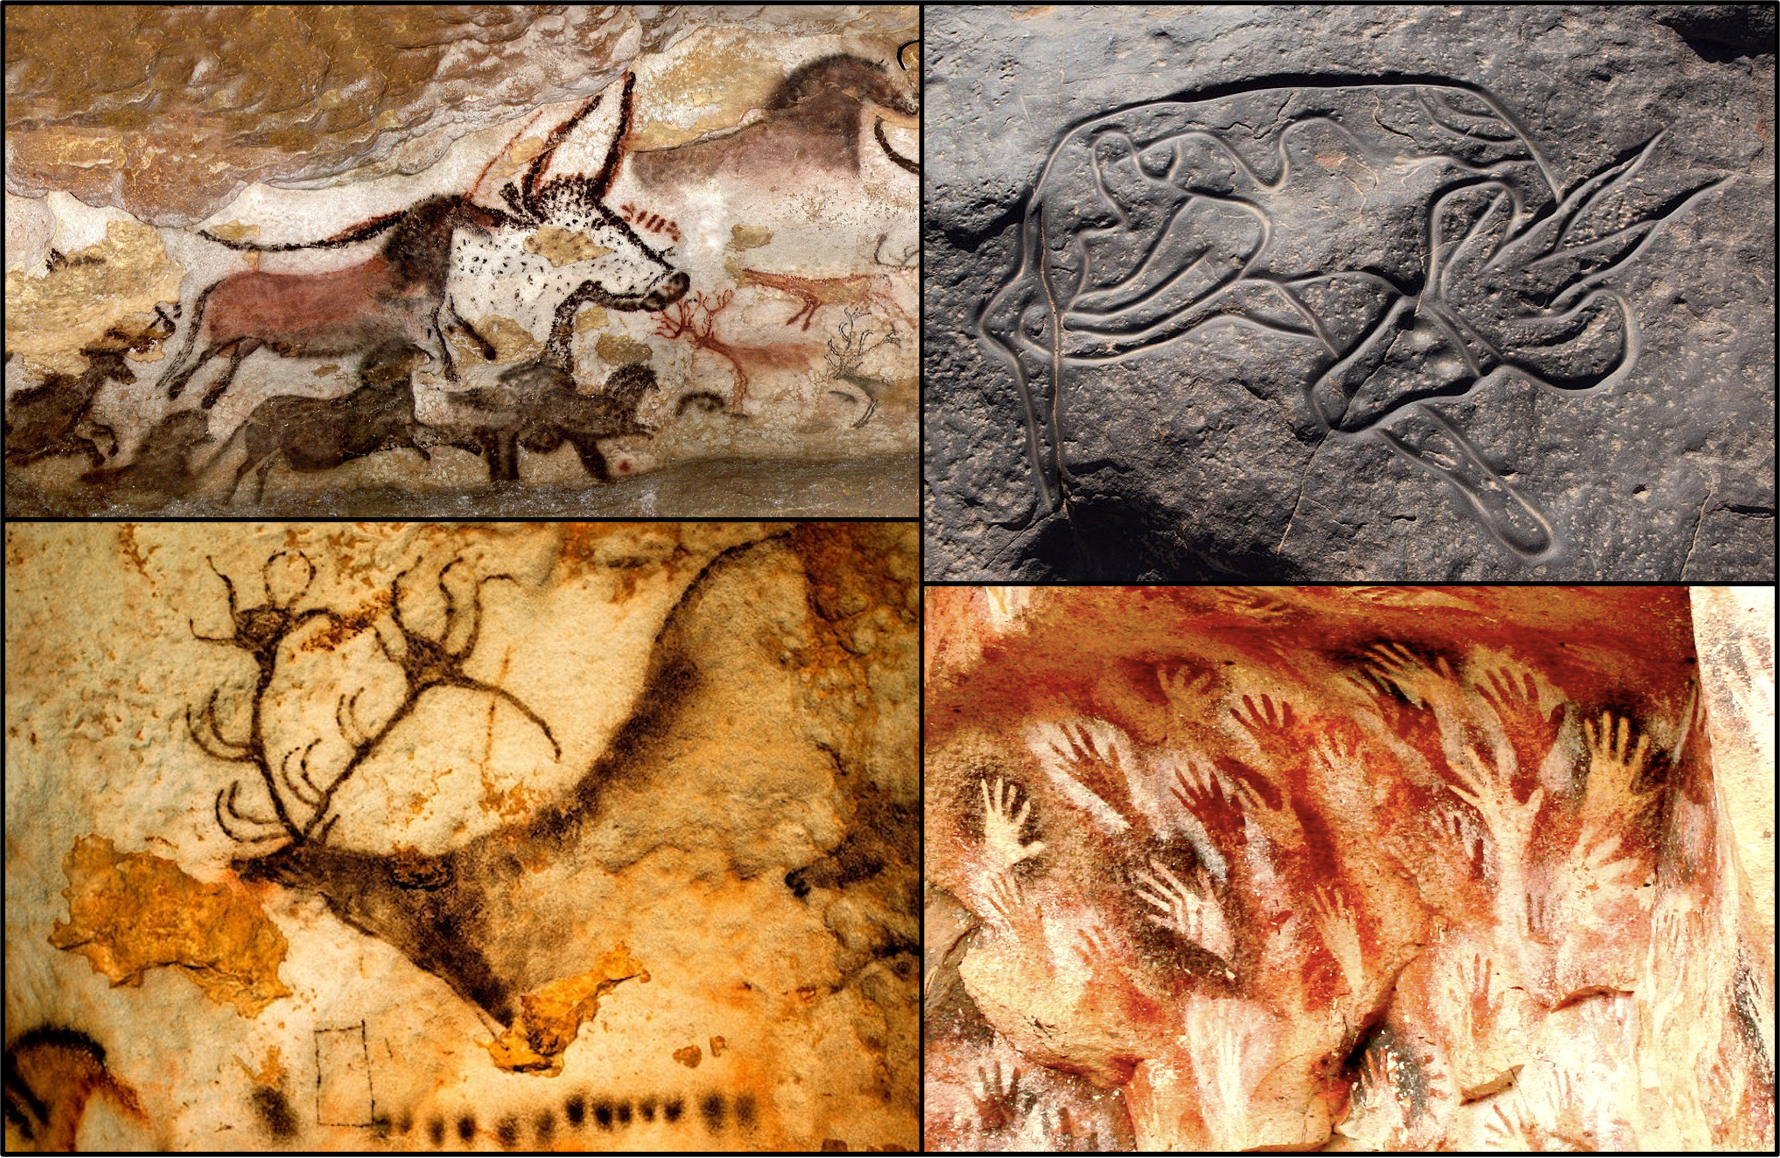 Some drawings, symbols, and even hand-stamps from the prehistoric era